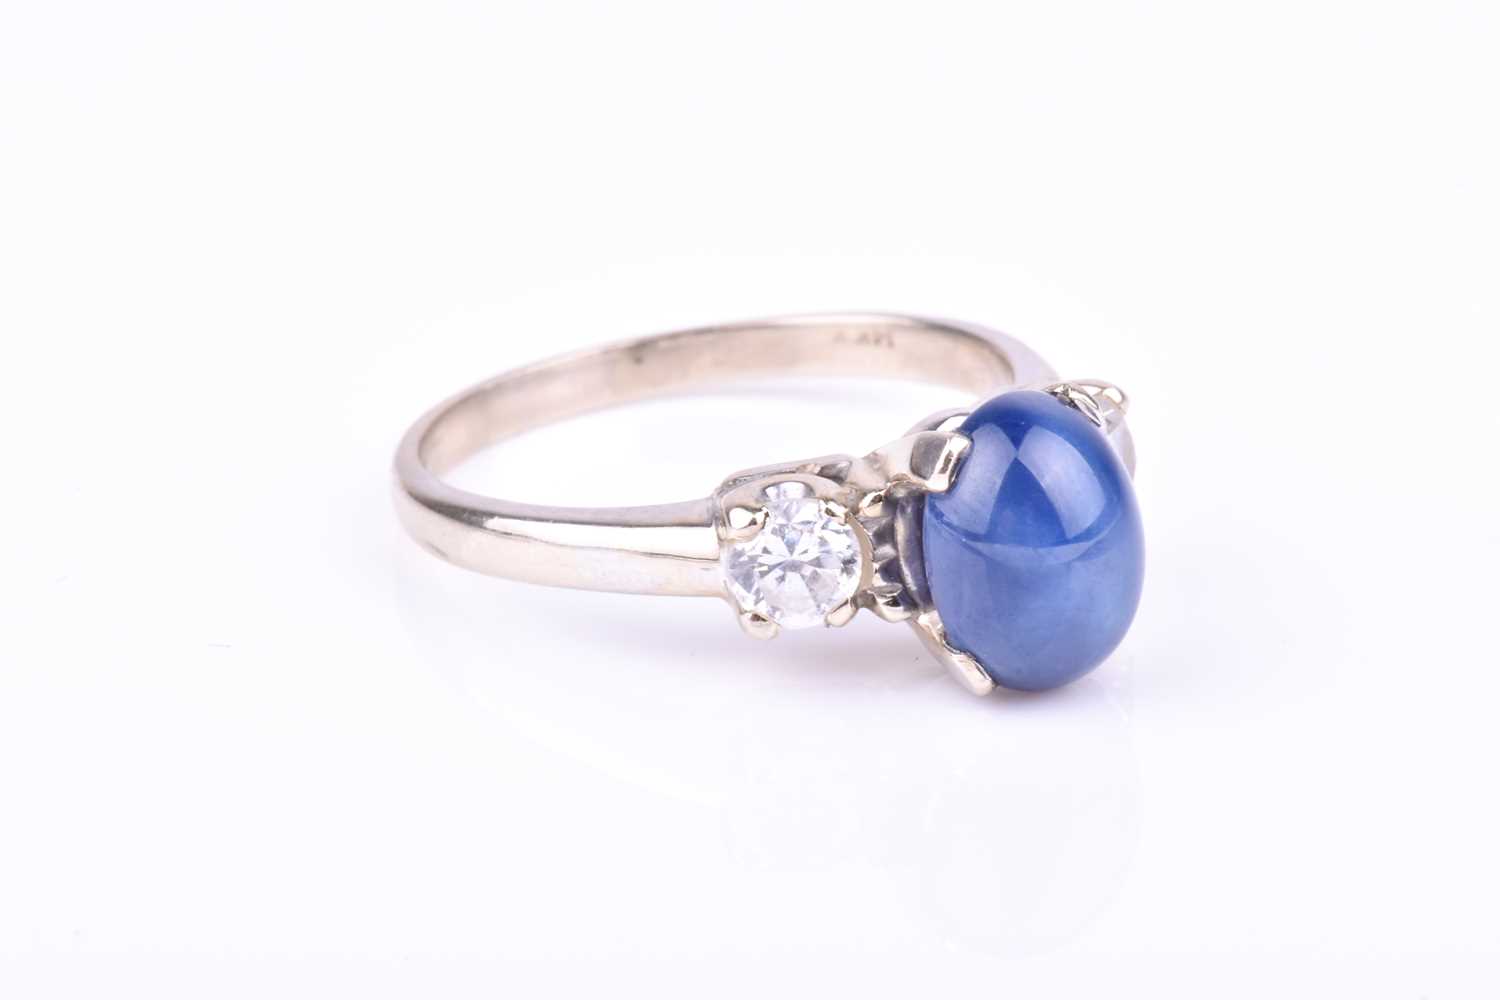 A 14k white gold, star sapphire, and CZ ringset with an oval star sapphire flanked with two round- - Image 3 of 3